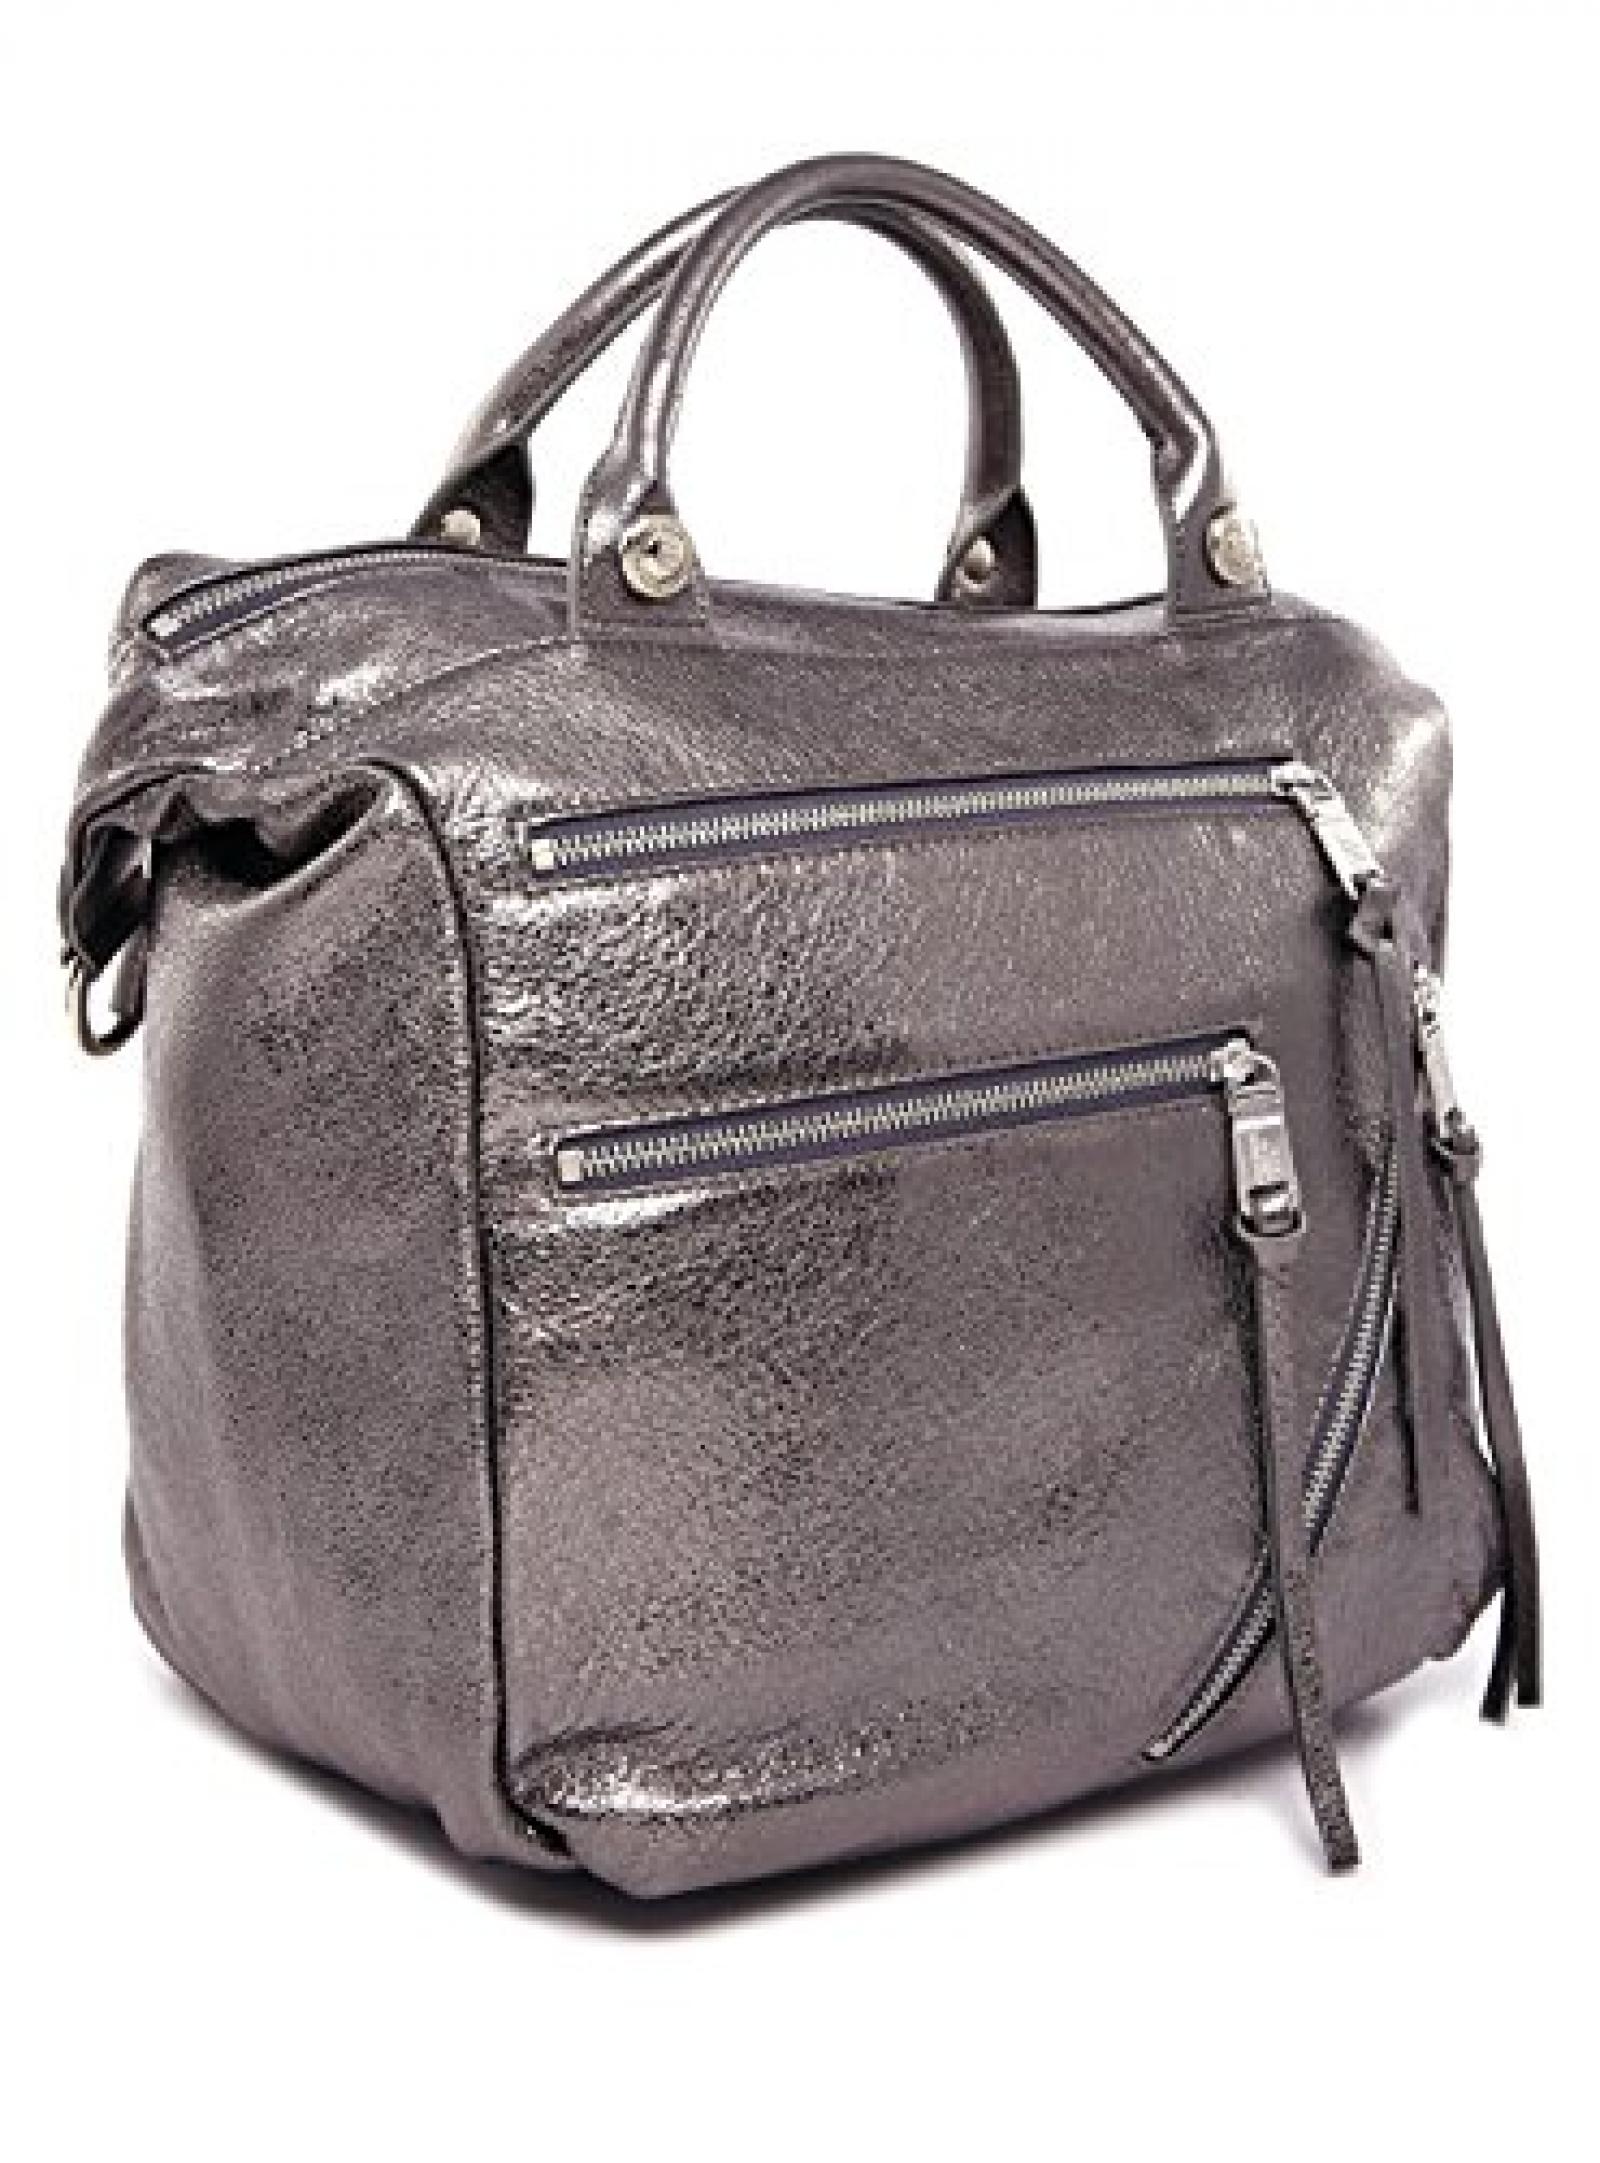 GEORGE GINA & LUCY Furious Bag Tasche 